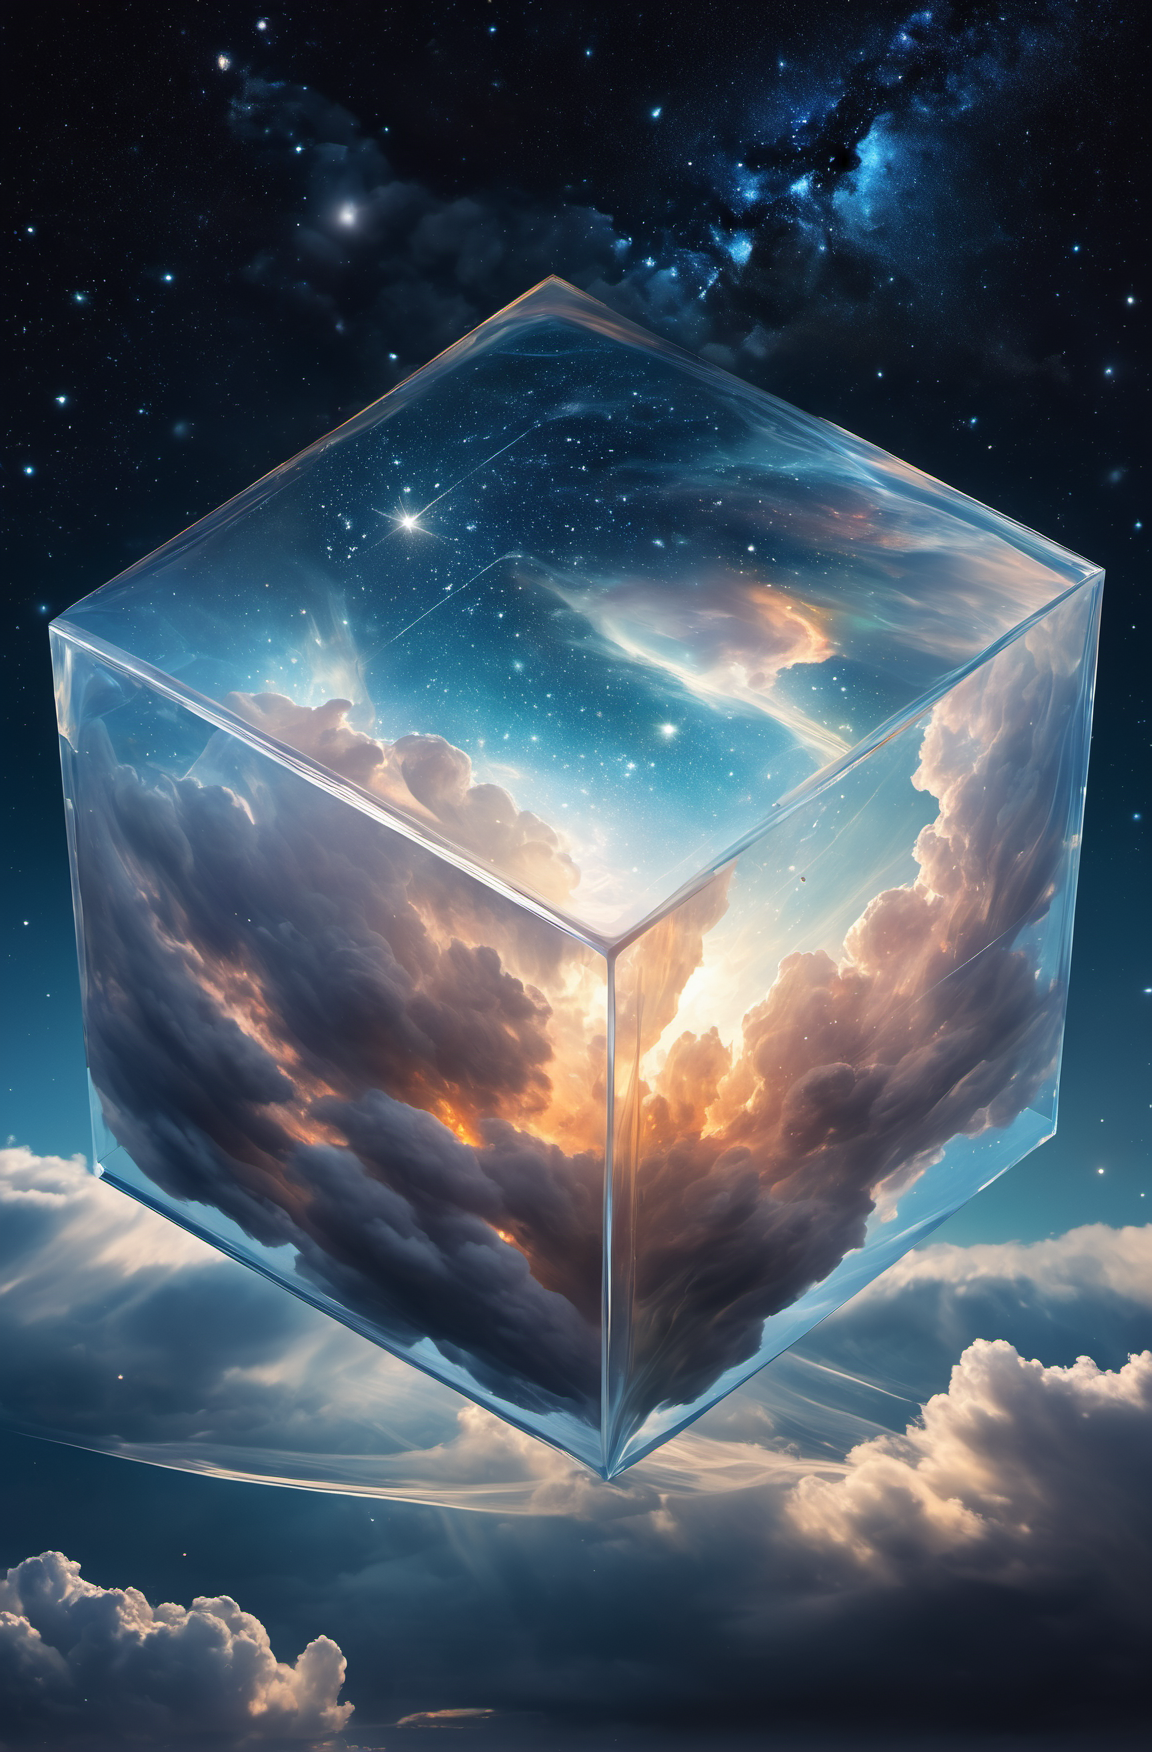 Bosch-style, a translucent cube traps eerie clouds, the starsscape warps, time distorts, surrealism reigns, stars, Glowing...